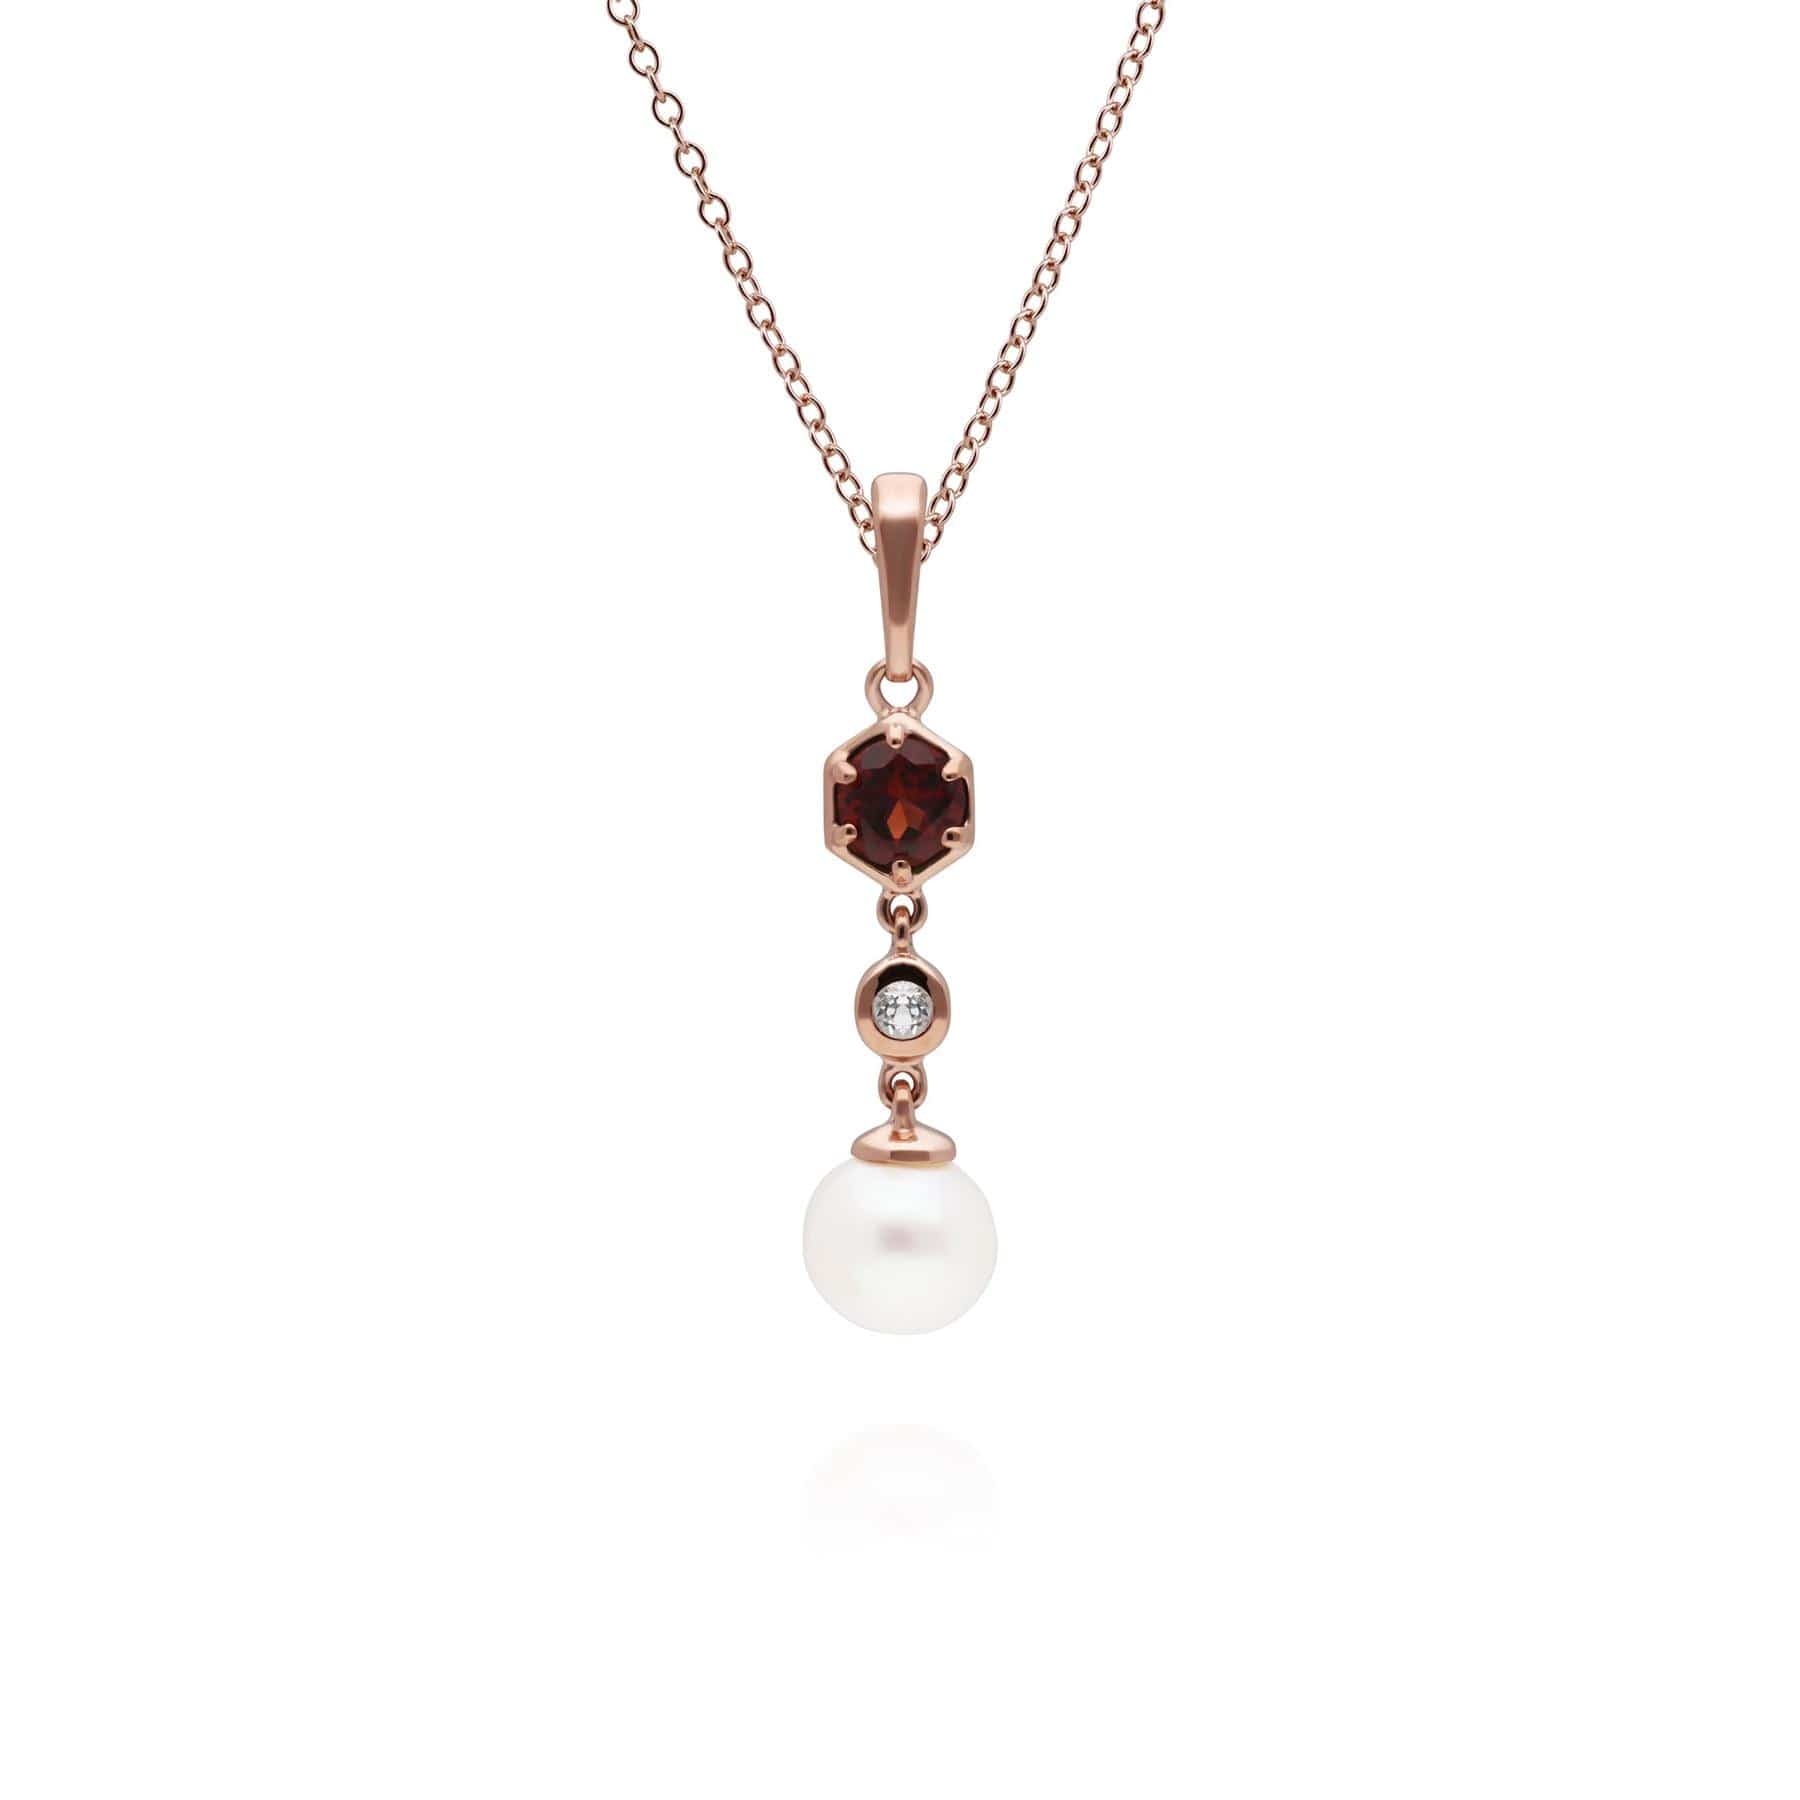 Photos - Pendant / Choker Necklace Modern Pearl, Garnet & Topaz Drop Pendant in Rose Gold Plated Sterling Sil